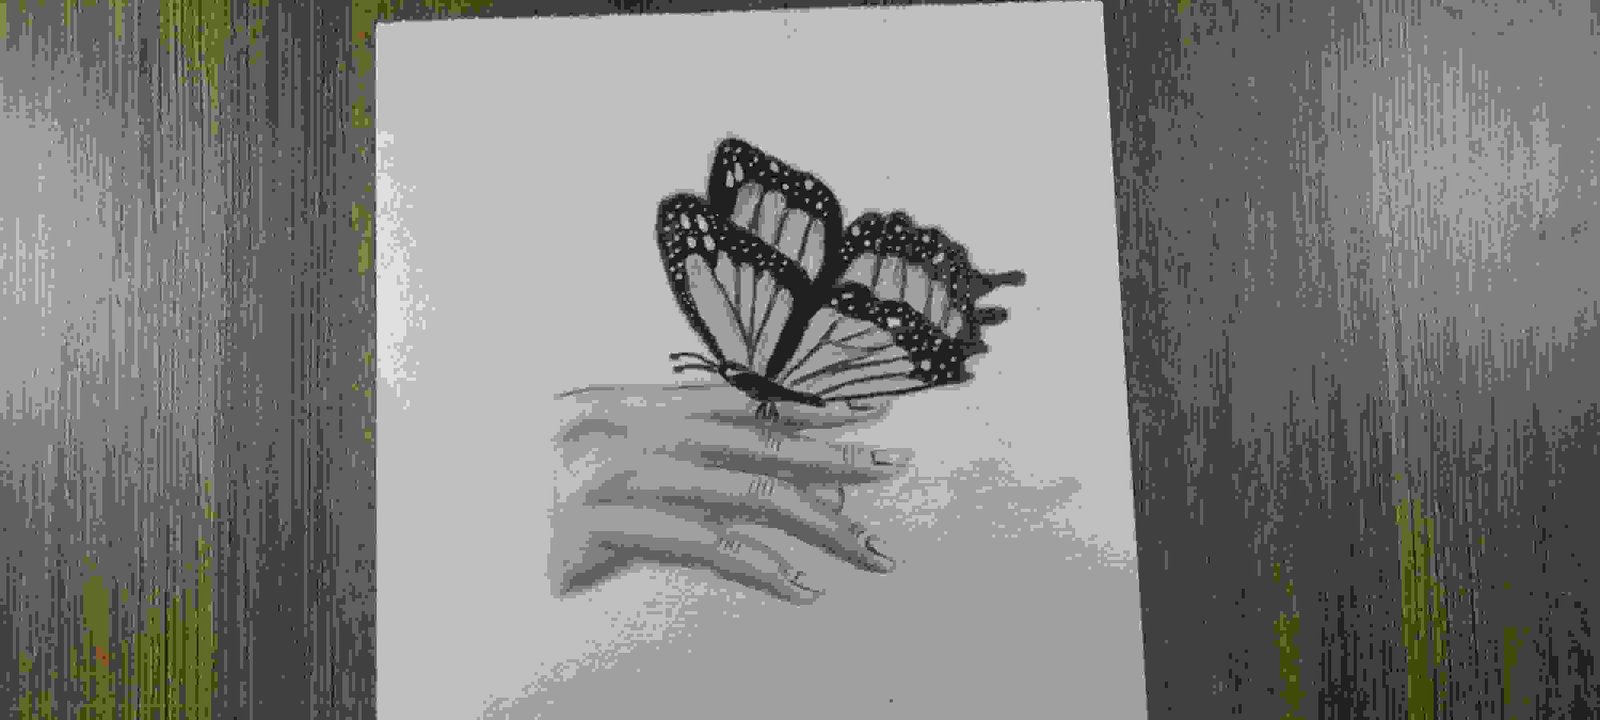 Painting Of Butterfly With Hand Pansil Sketch In Butterfly